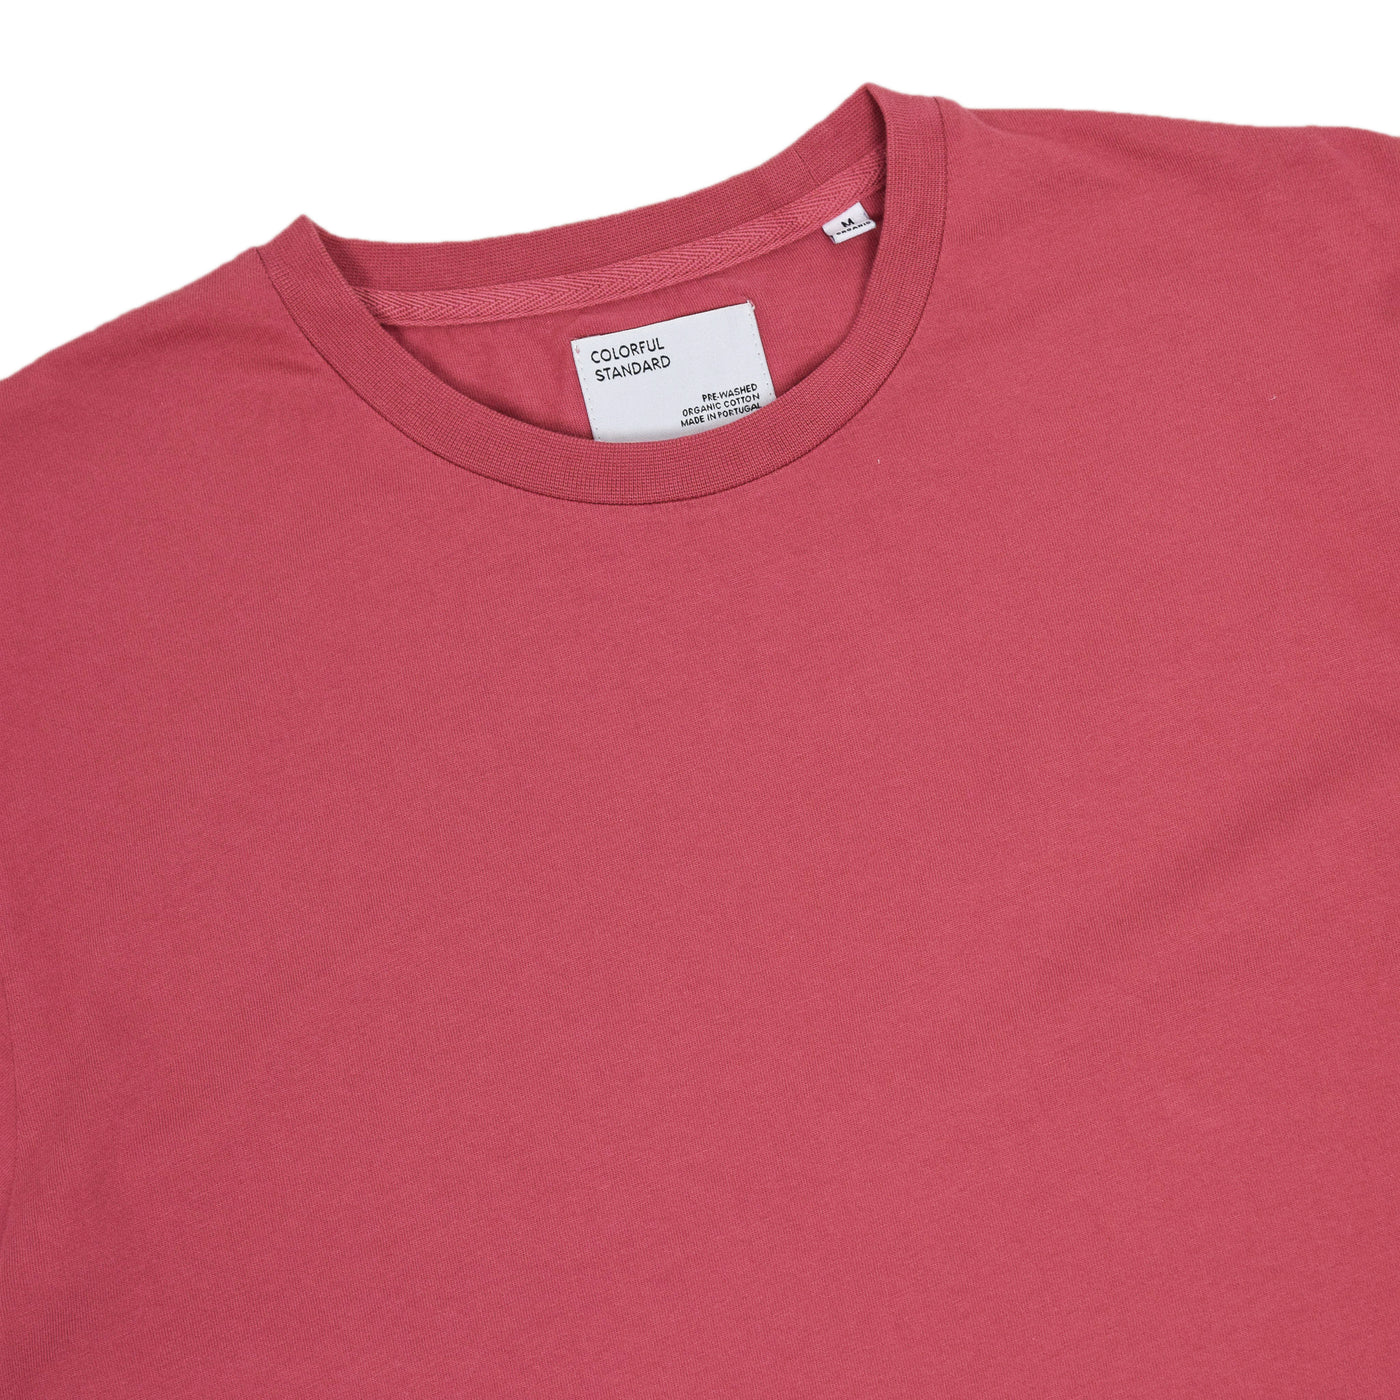 Colorful Standard Classic Organic Cotton Tee Raspberry Pink chest